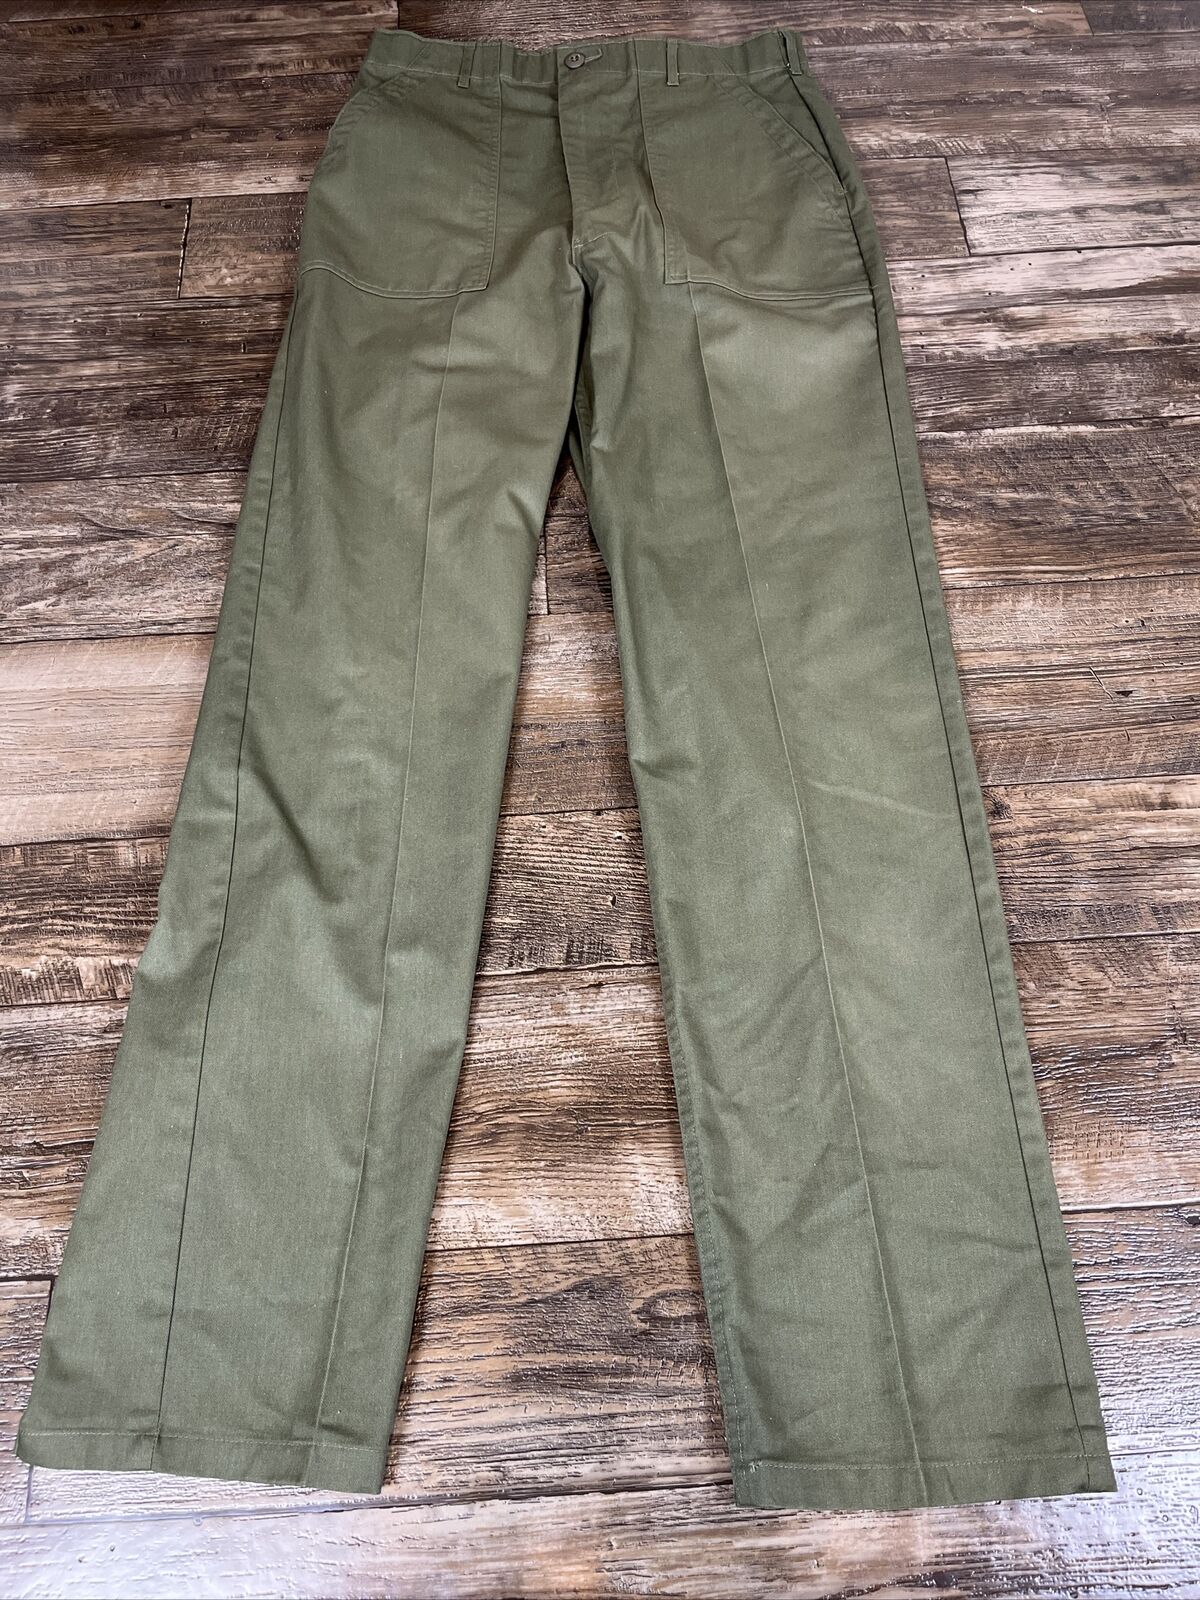 Vintage Military Pants Men’s 32.5x35 OG-507 Utility Trousers Olive Green US Army